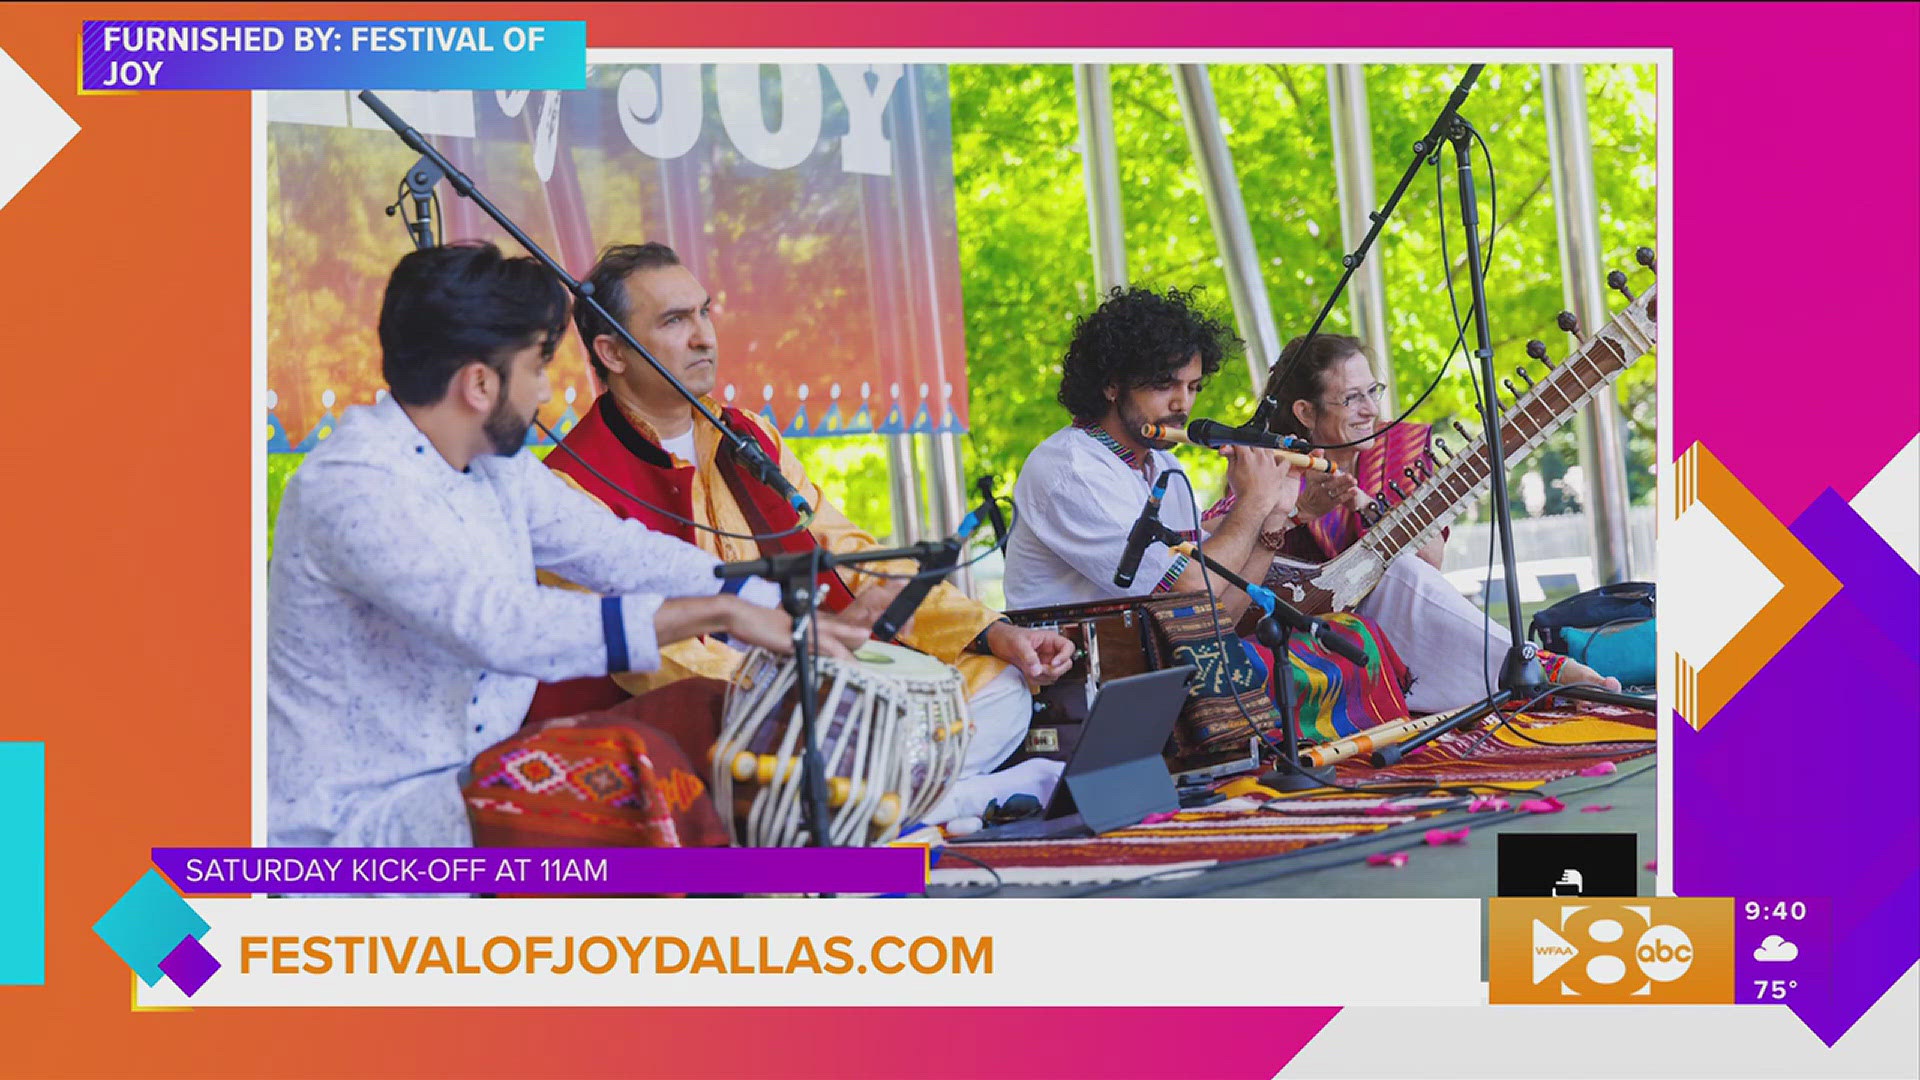 Find out what you can expect at this year's Festival of Joy. Go to festivalofjoydallas.com for more information.